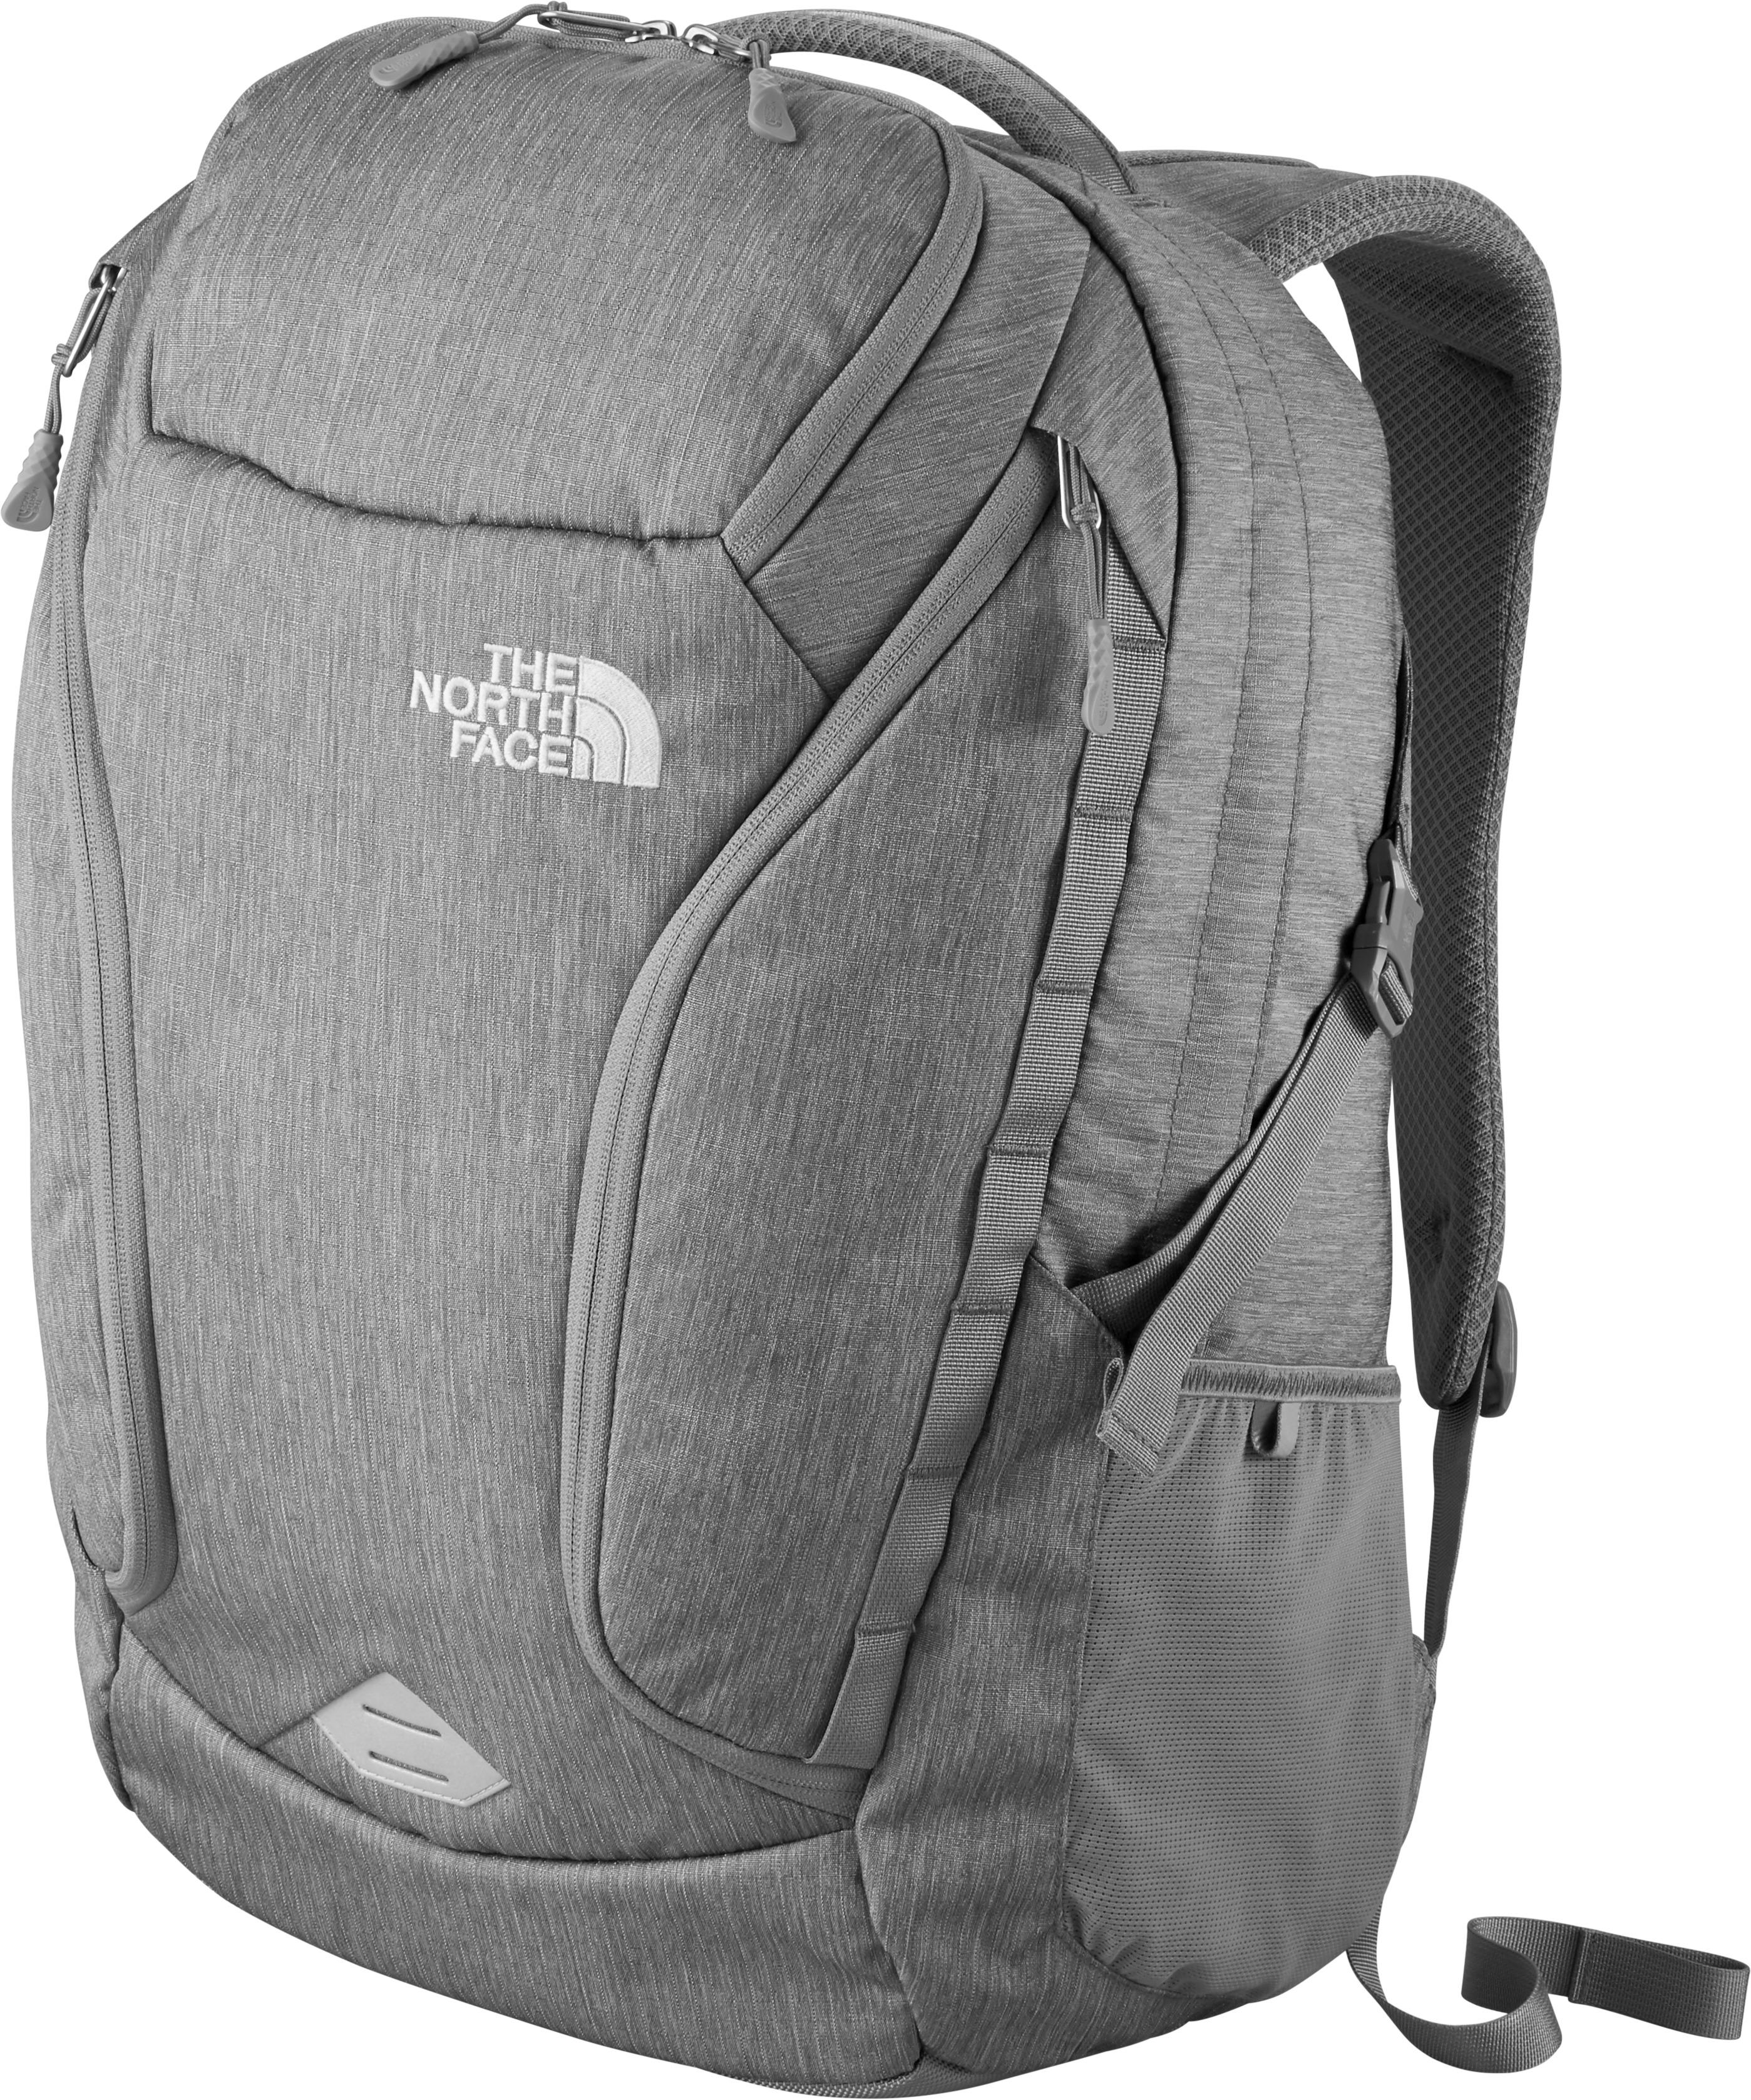 north face mainframe